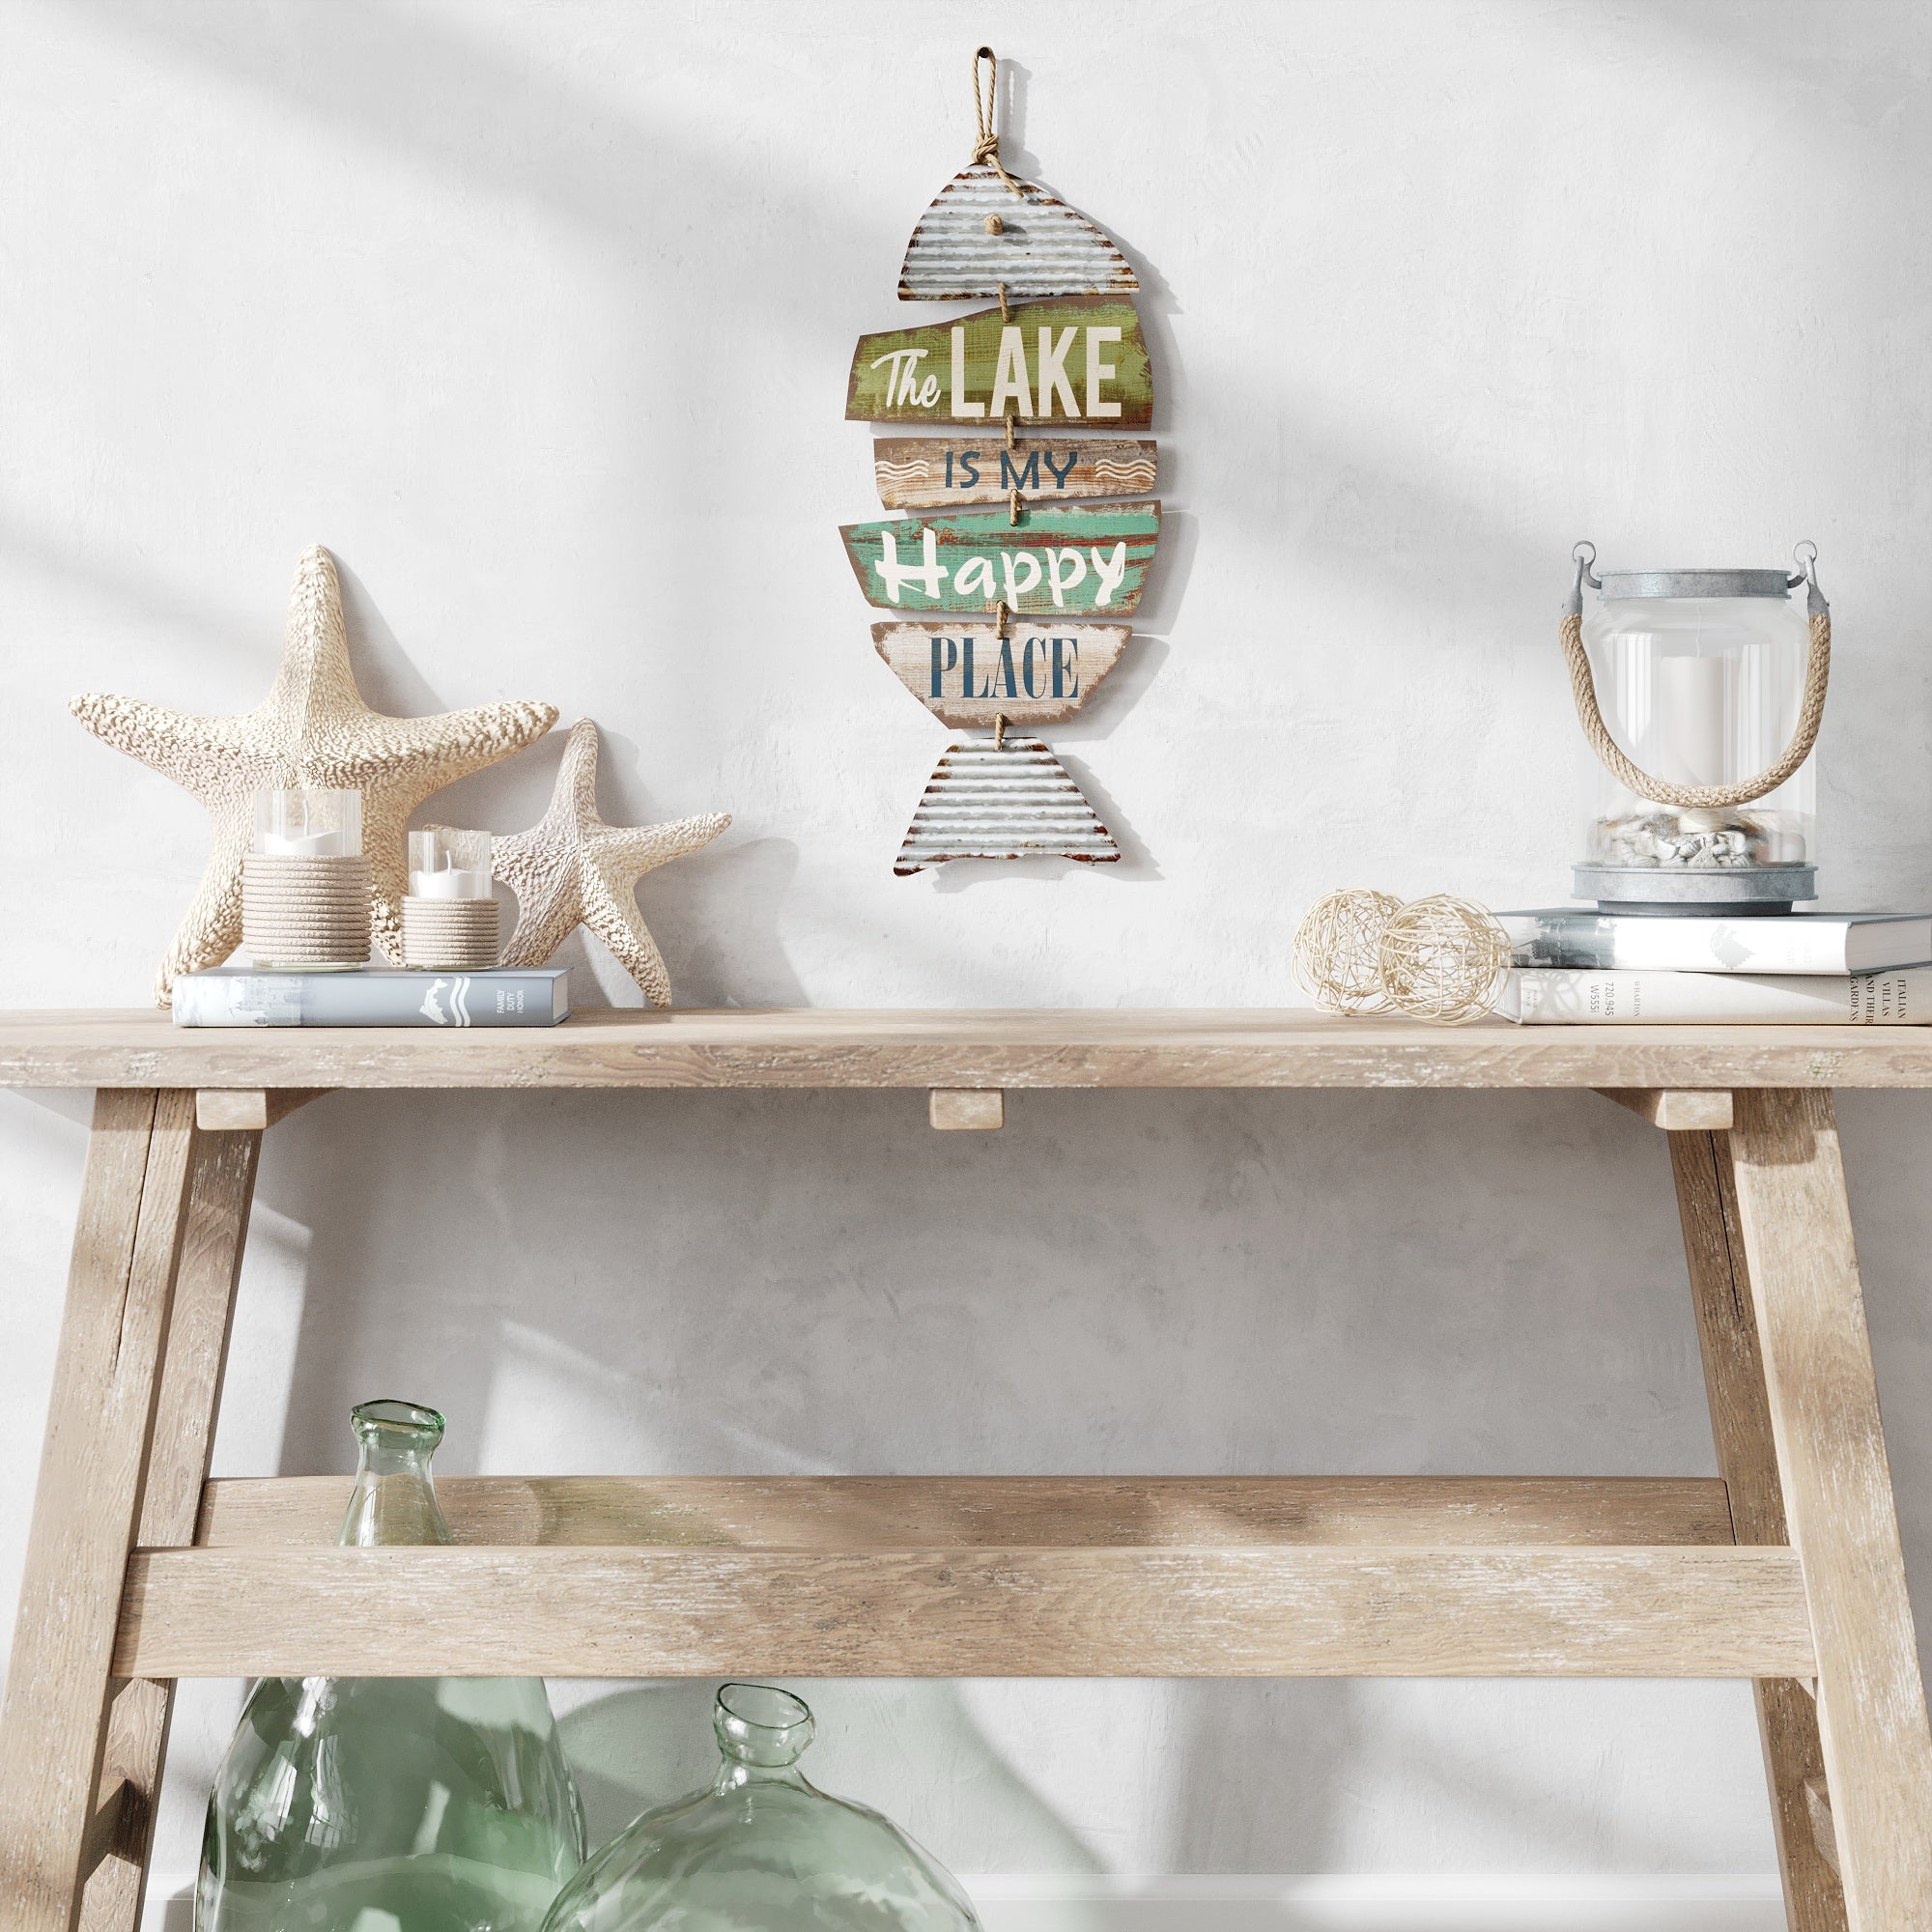 Barnyard Designs 'The Lake is my Happy Place' Lake House Decor for